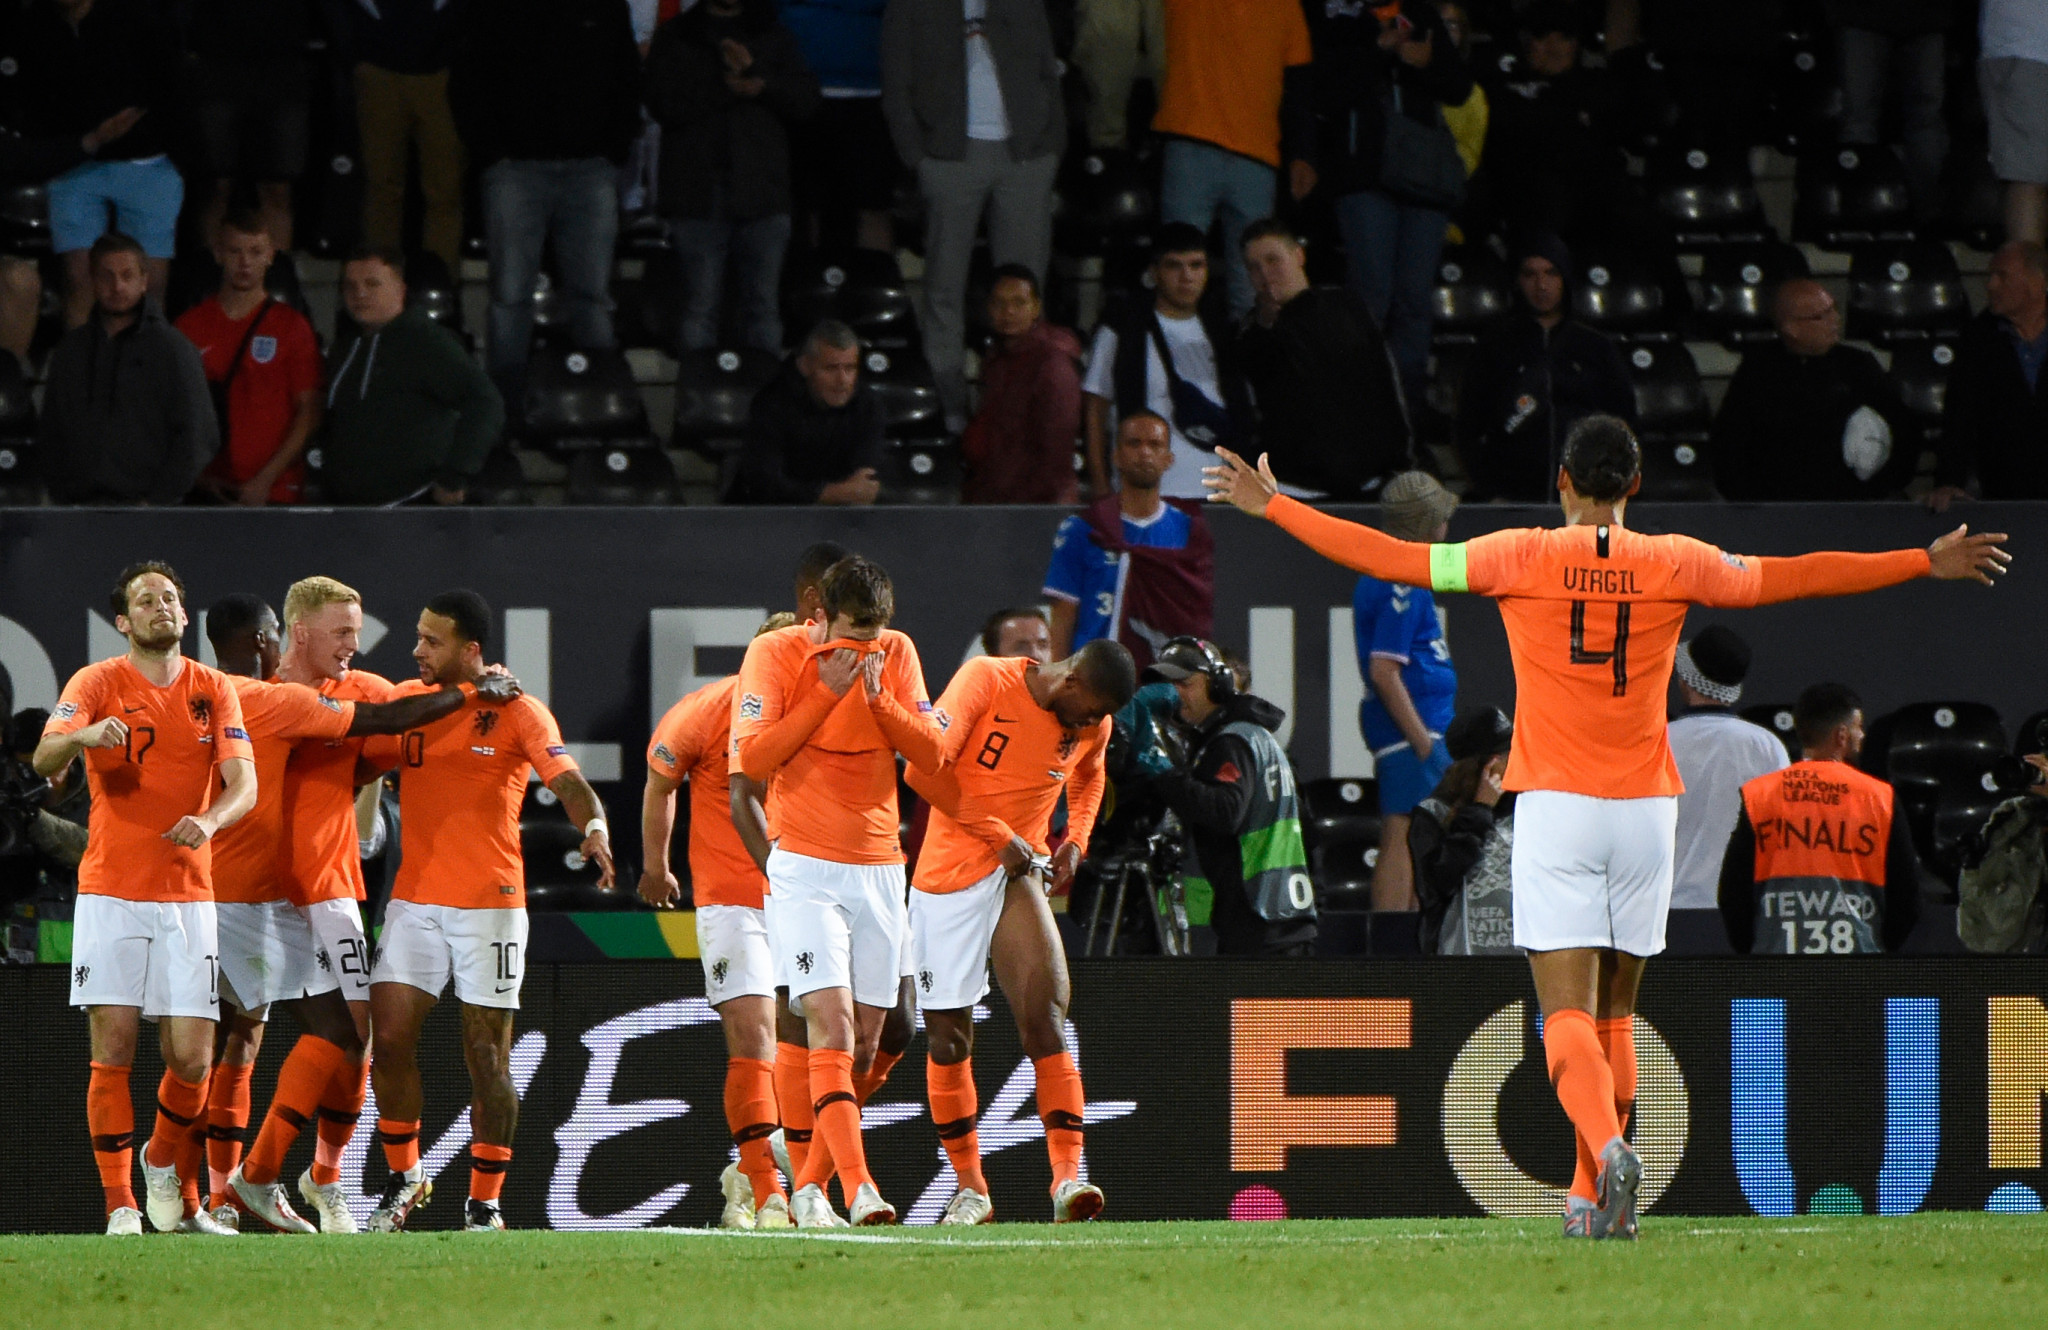 Stones errors prove costly as Netherlands beat England to reach UEFA Nations League final